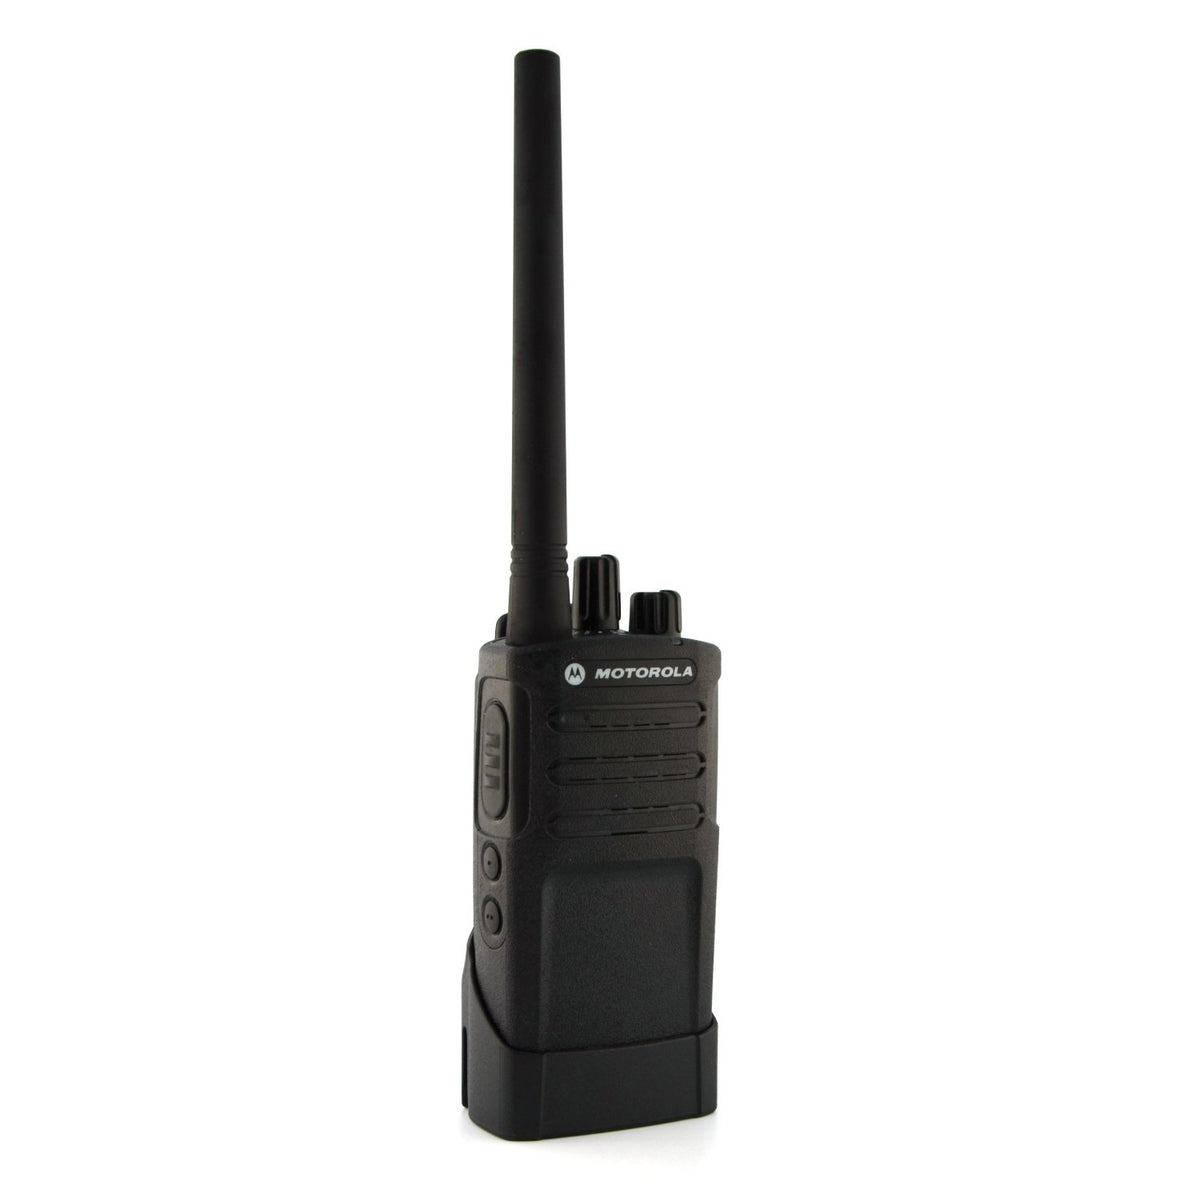 Morotola RMV2080 On-Site 8 Channel VHF Rugged Two-Way Business Radio